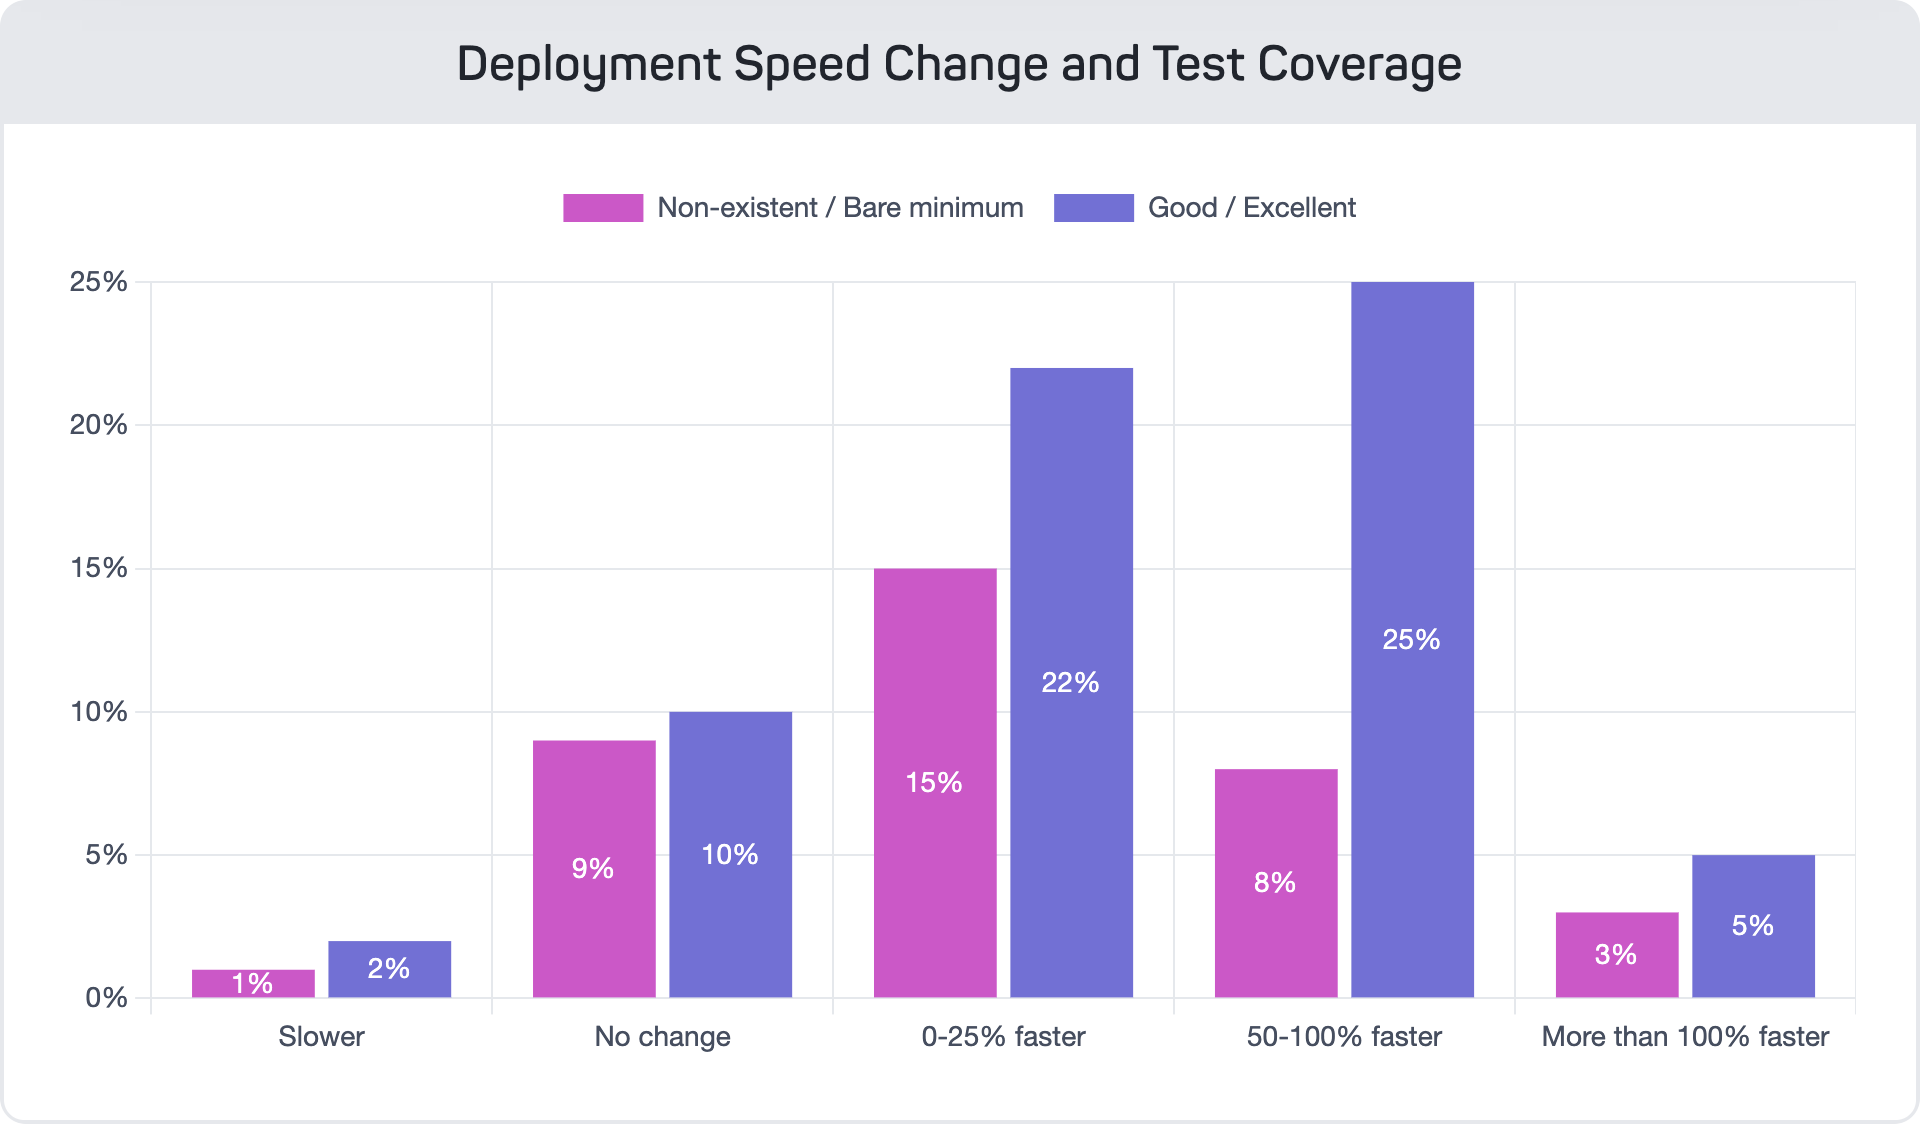 Chart of deployment speed and test coverage